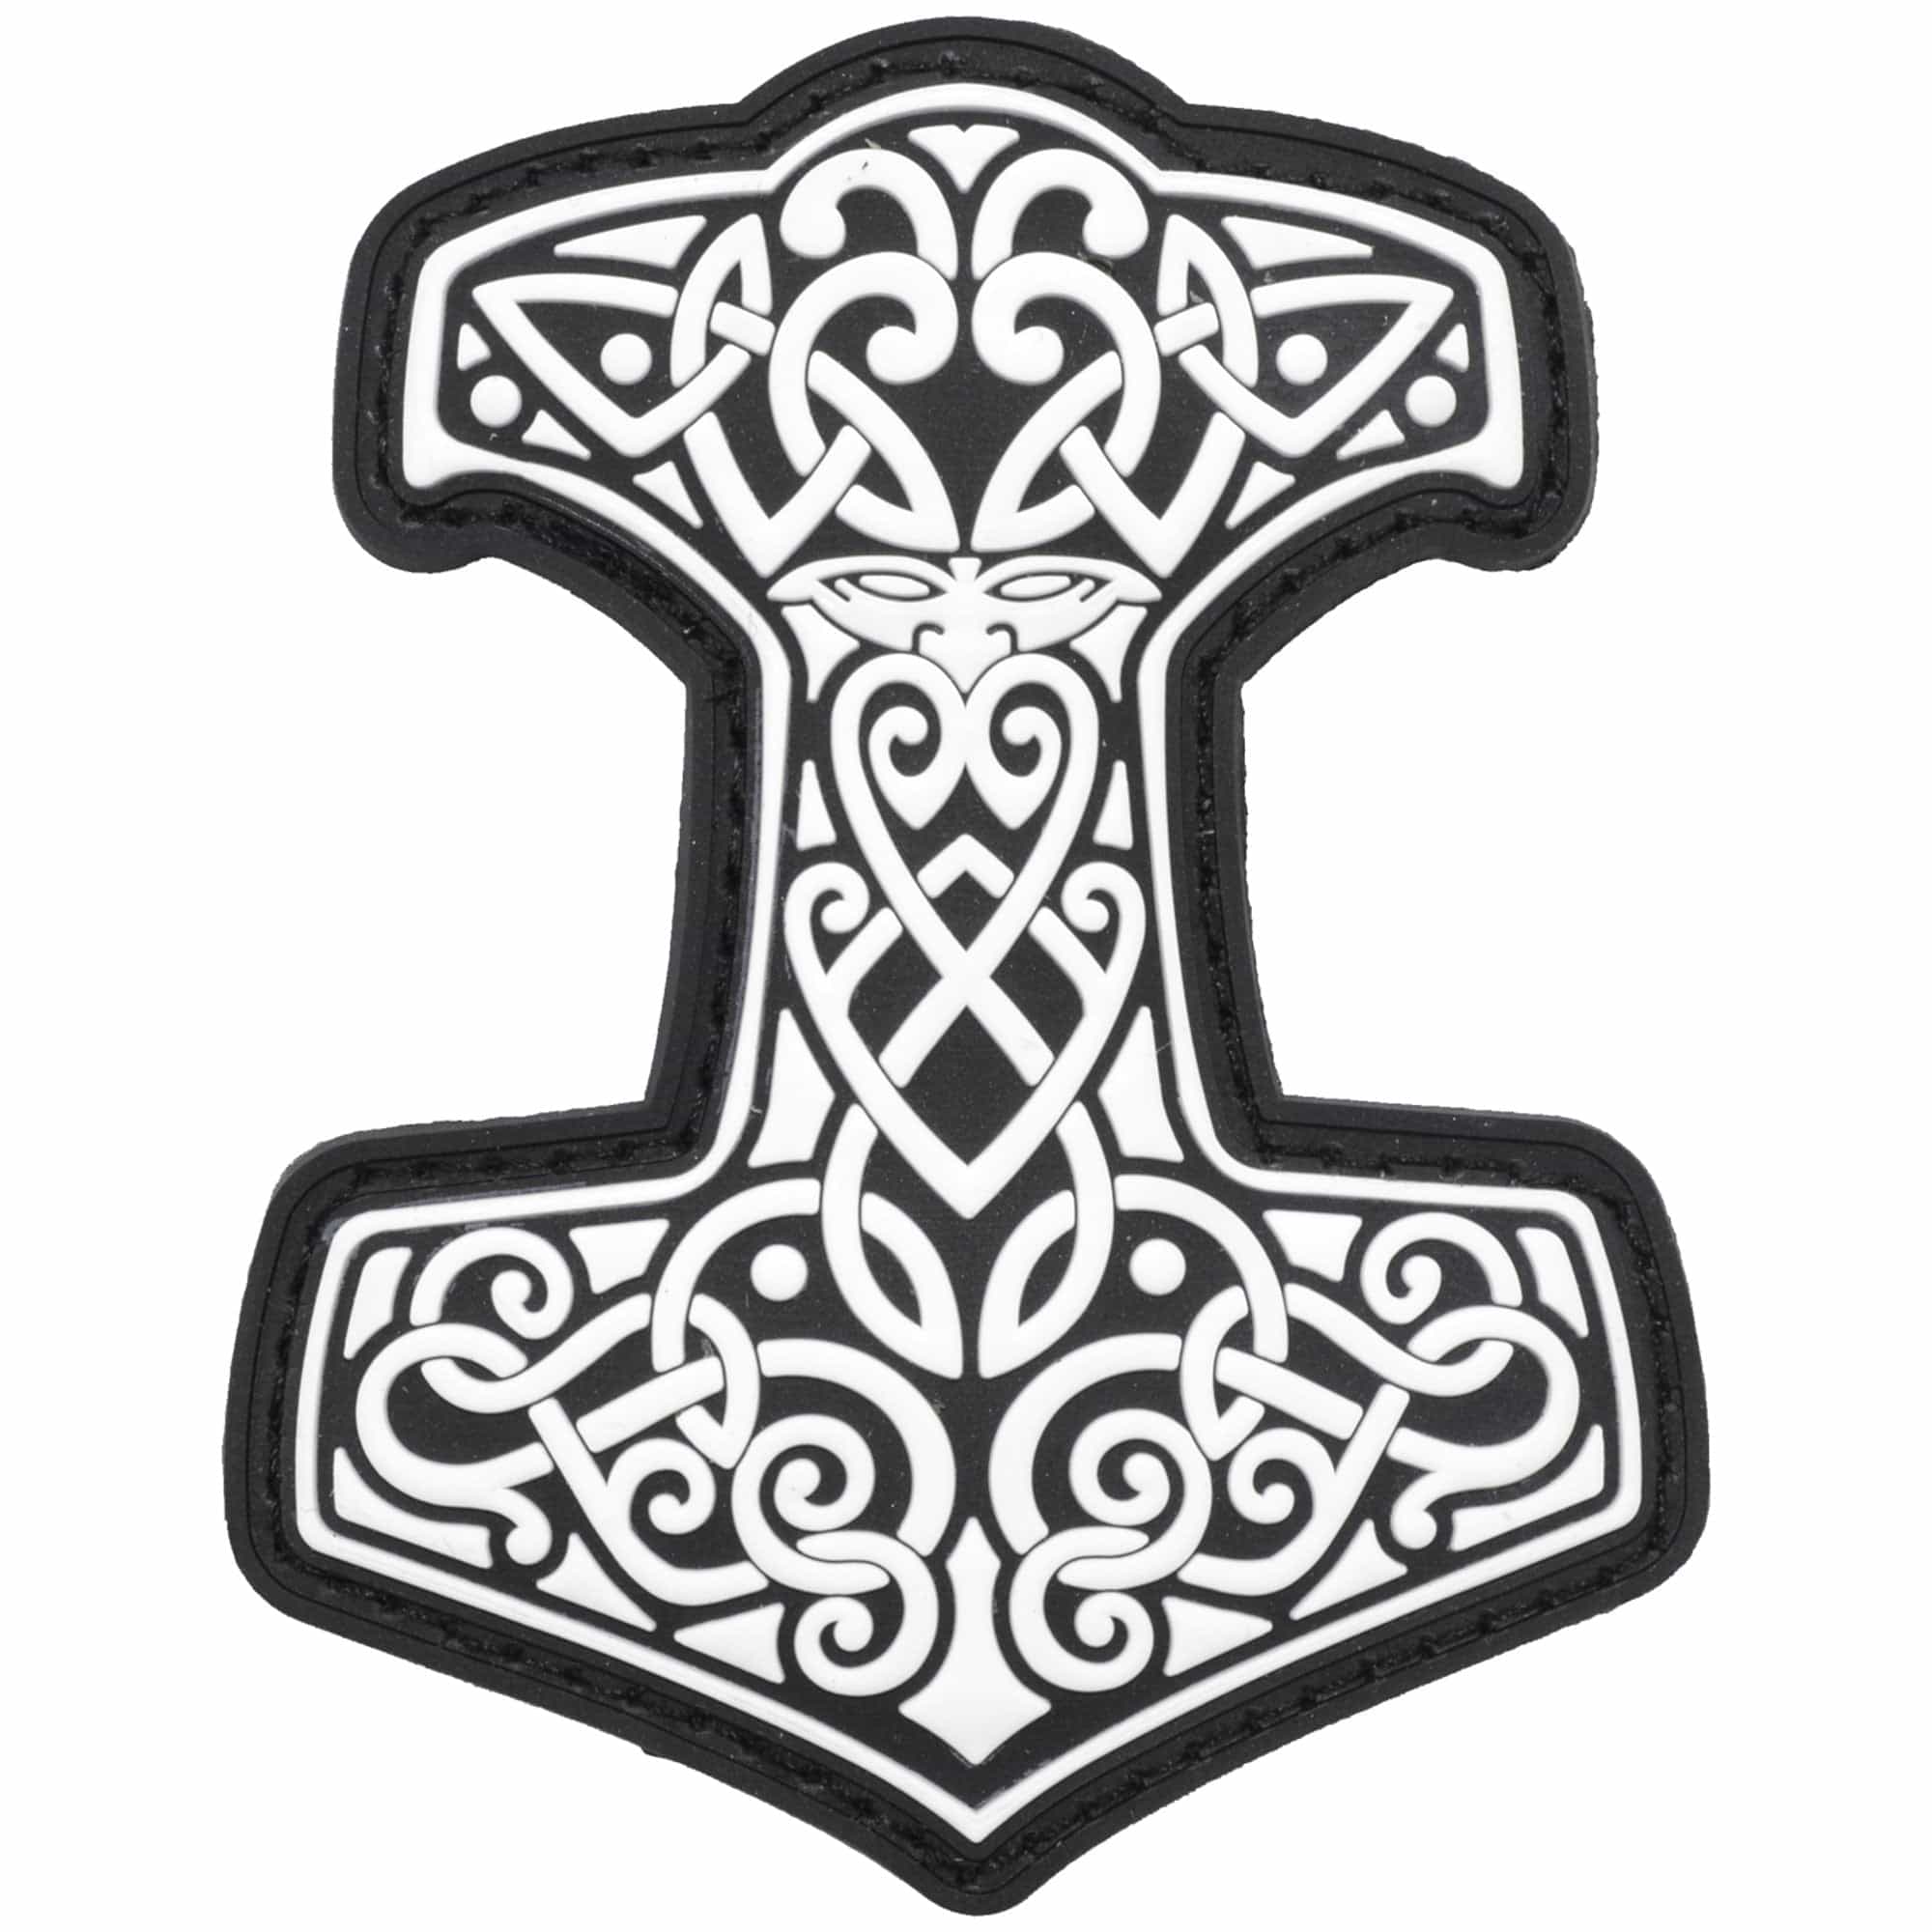 Tactical Gear Junkie Patches White Mjölnir Thor's Hammer Norse Viking - 2.5x3 PVC Patch - Multiple Colors